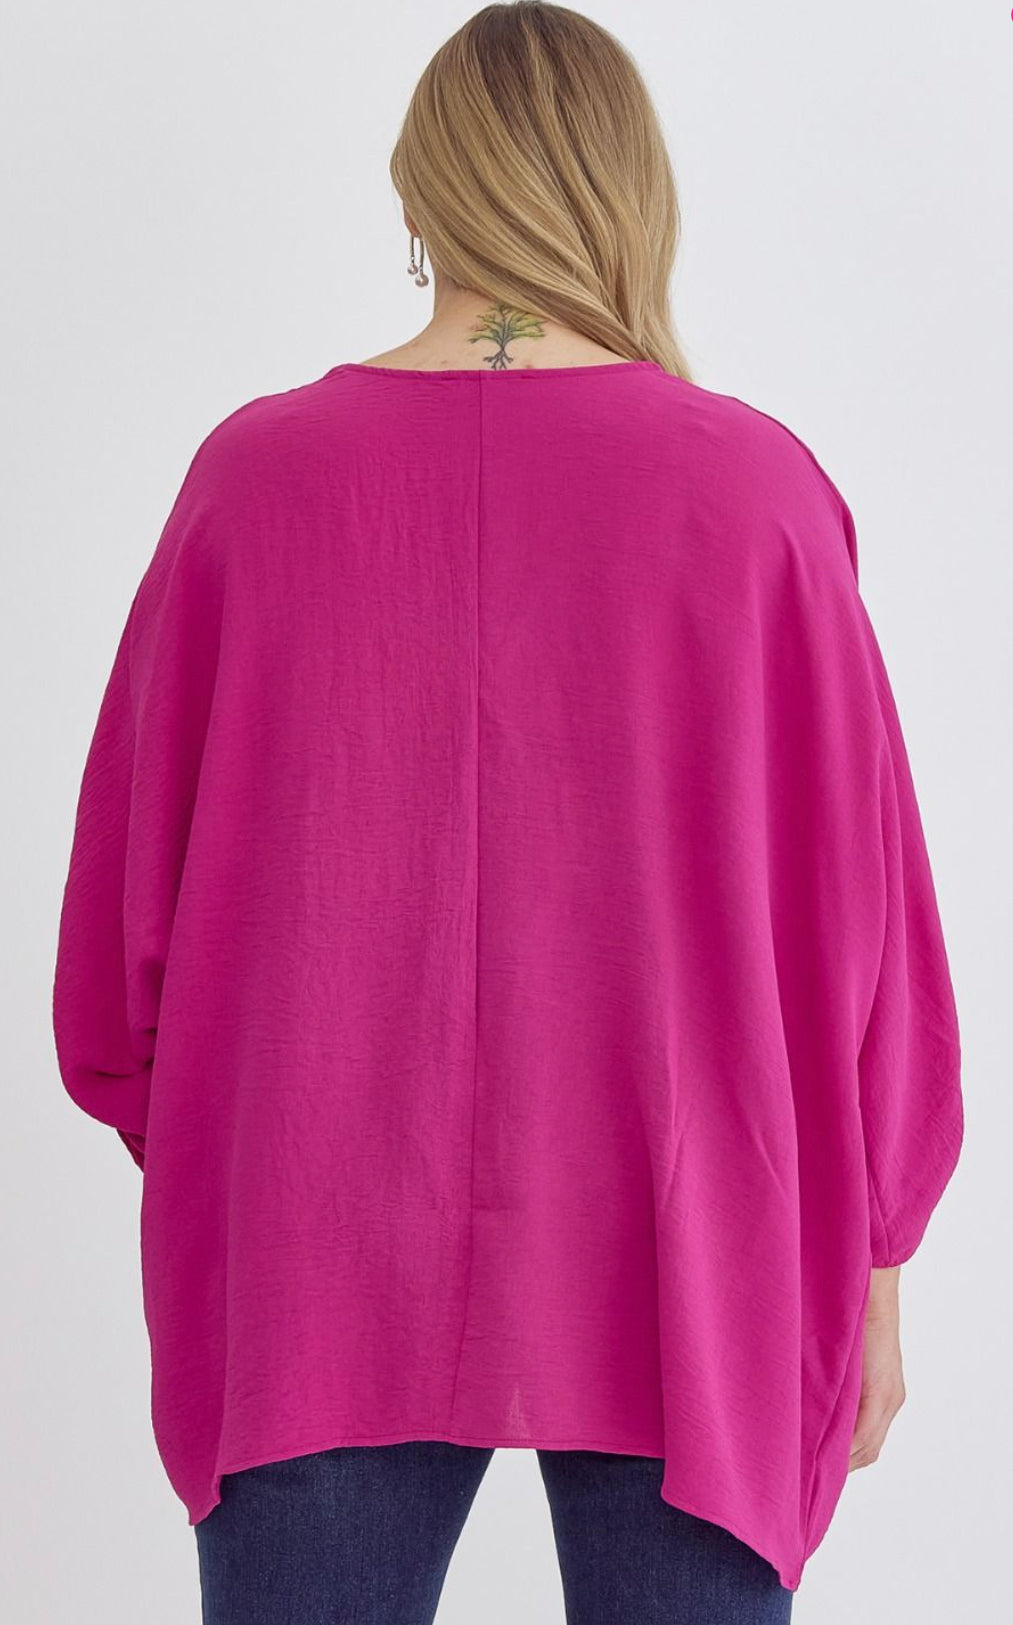 V-Neck 1/2 sleeve Top featuring Button Detailing at Sleeves